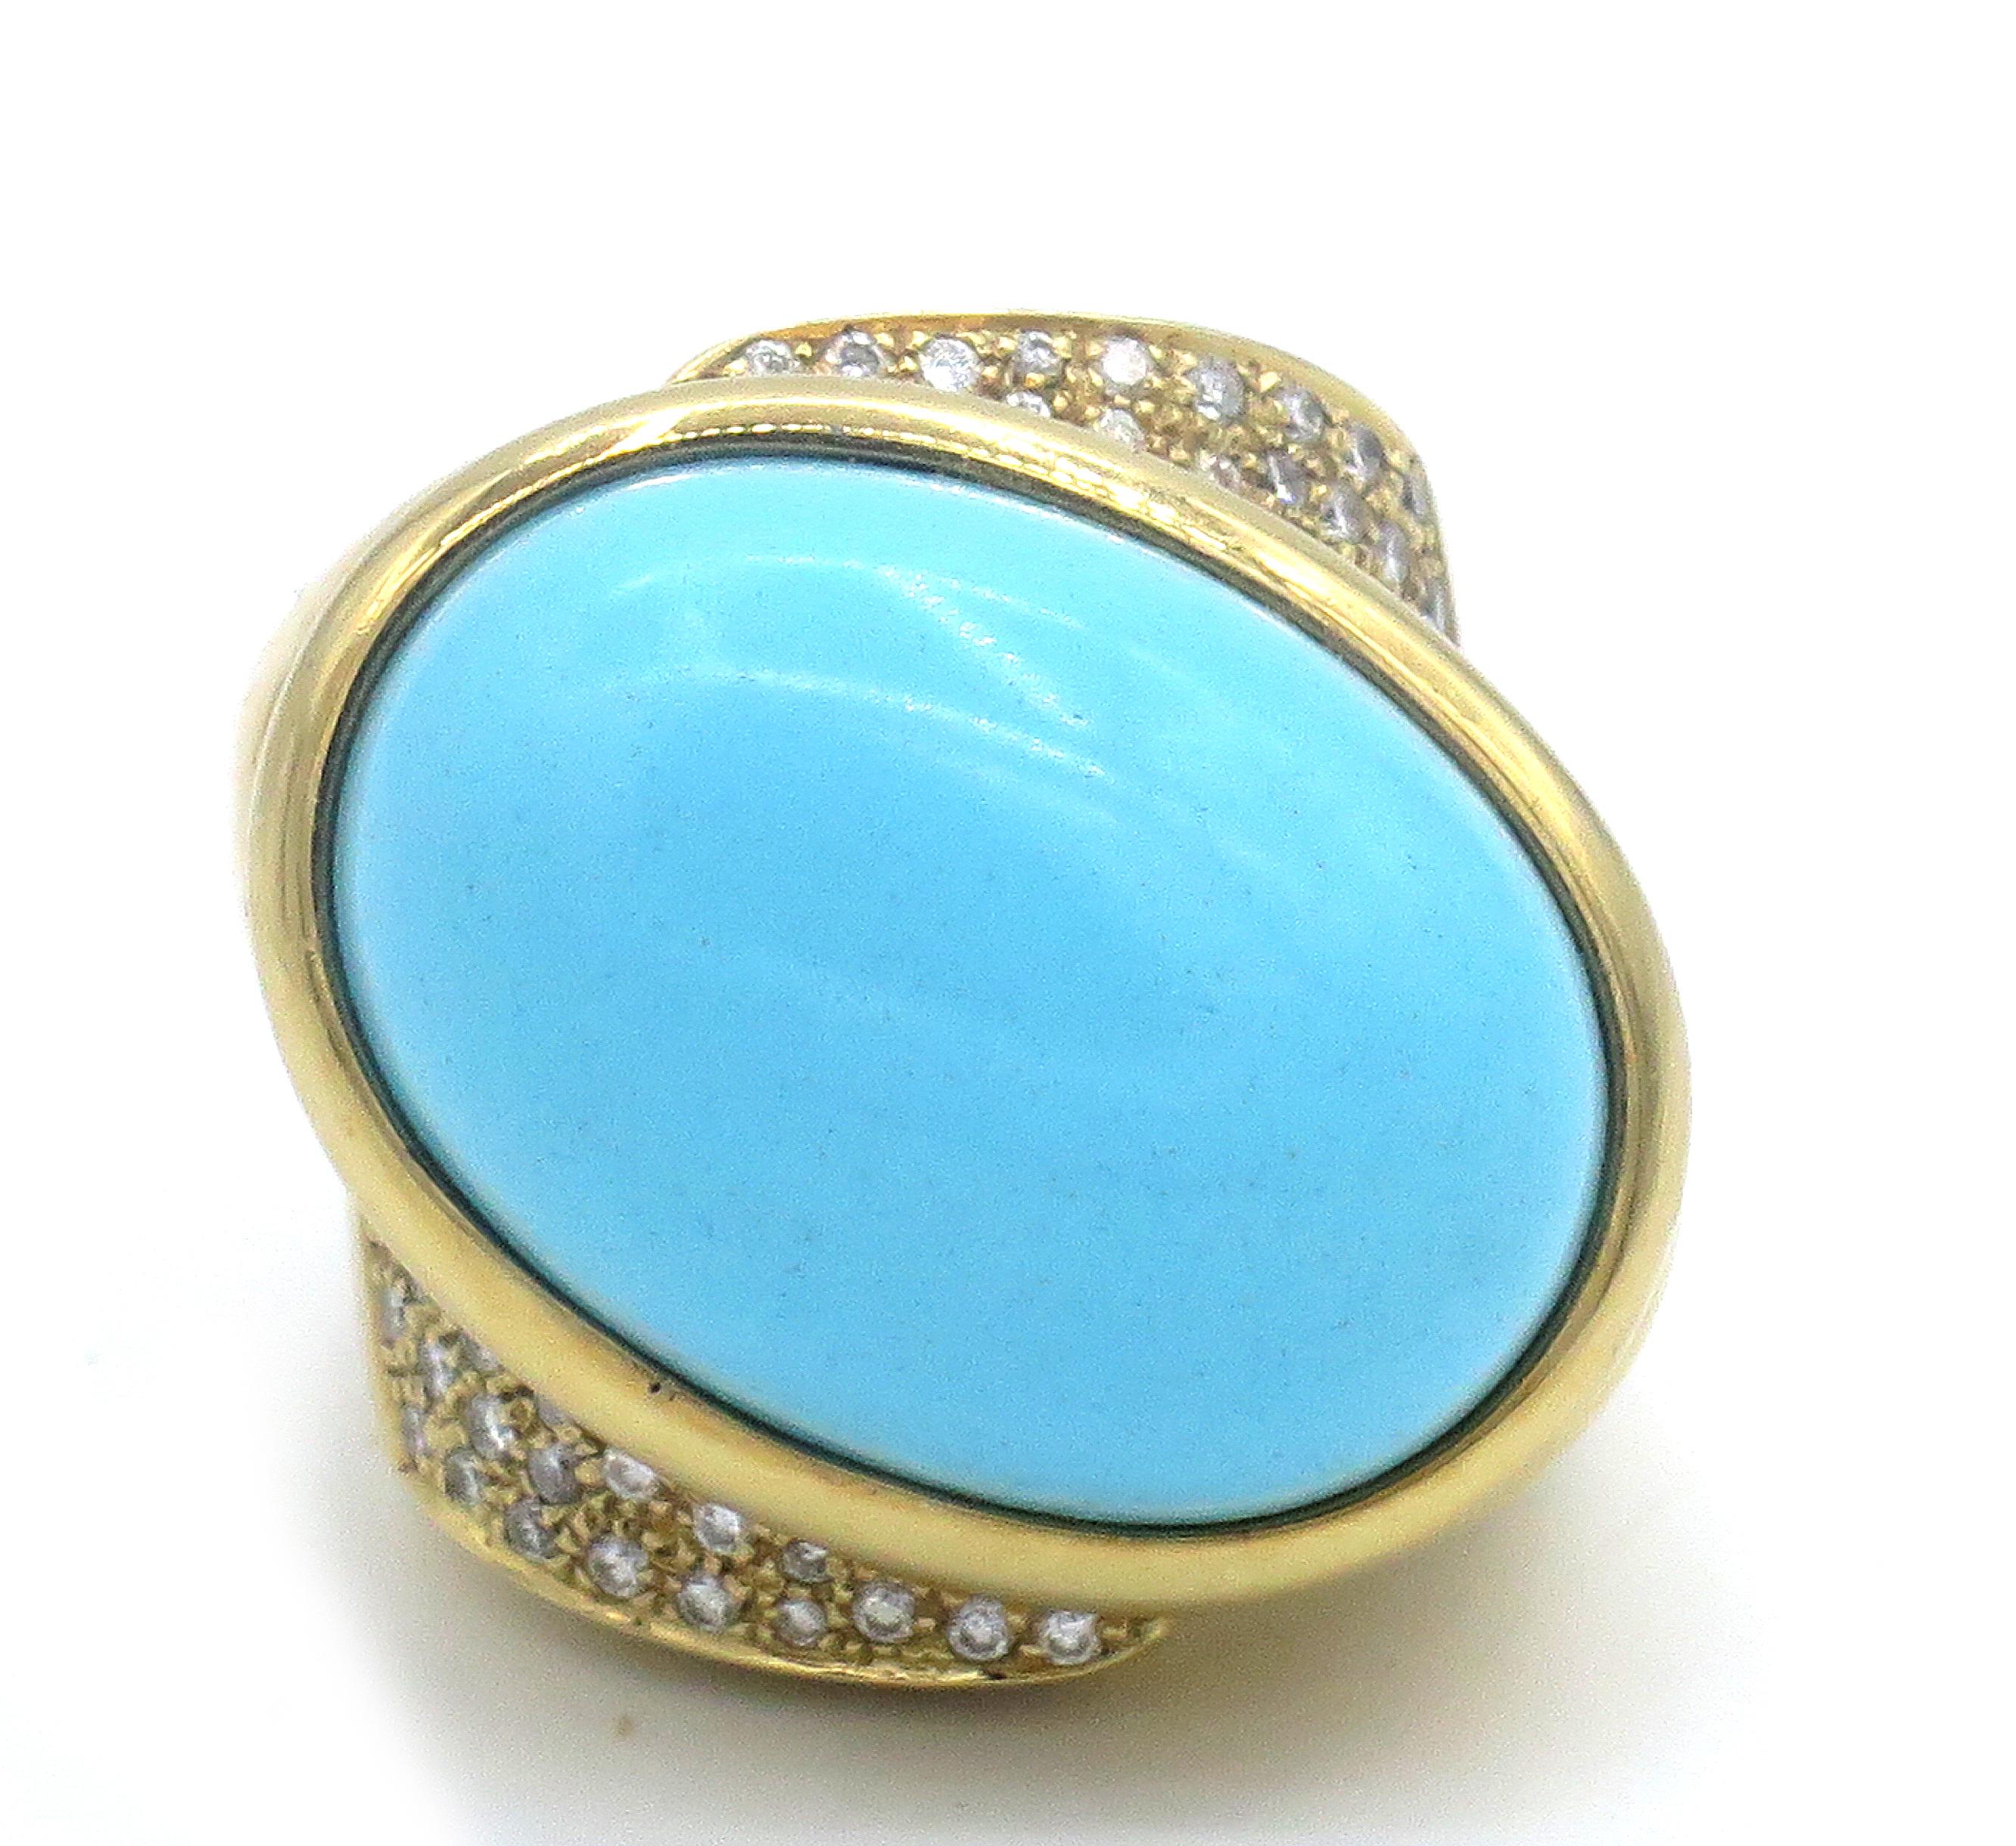 We, have an extremely beautiful cabochon turquoise ring. Crafted in a polished 18kt yellow gold. The ring features a beautiful cabochon turquoise which measures 1